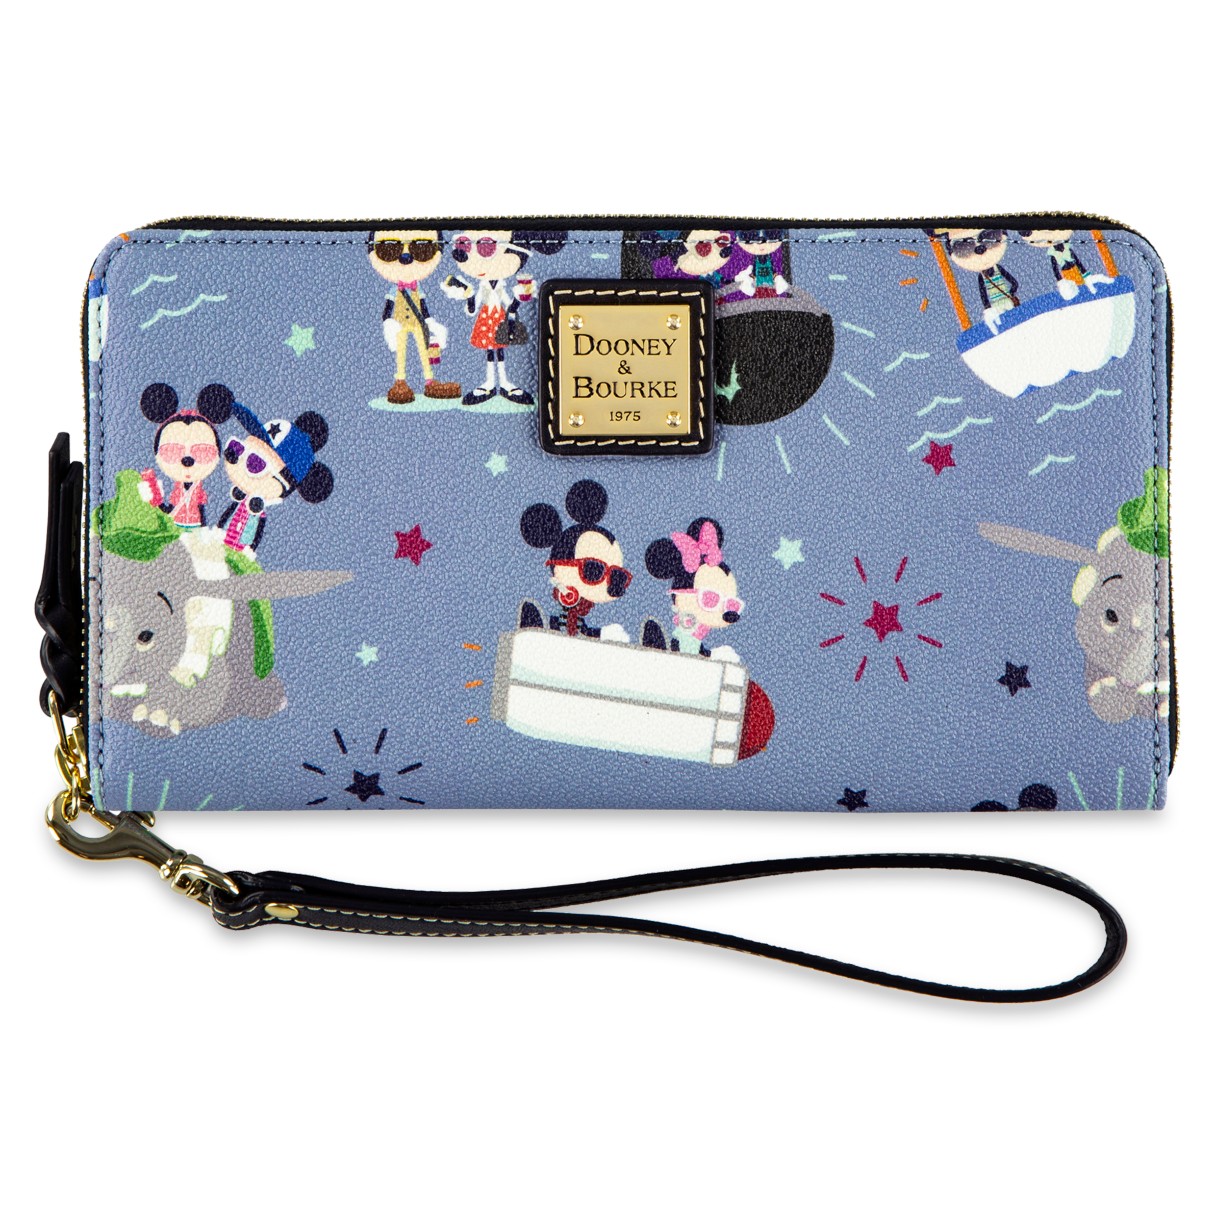 Mickey and Minnie Mouse Wallet by Dooney & Bourke